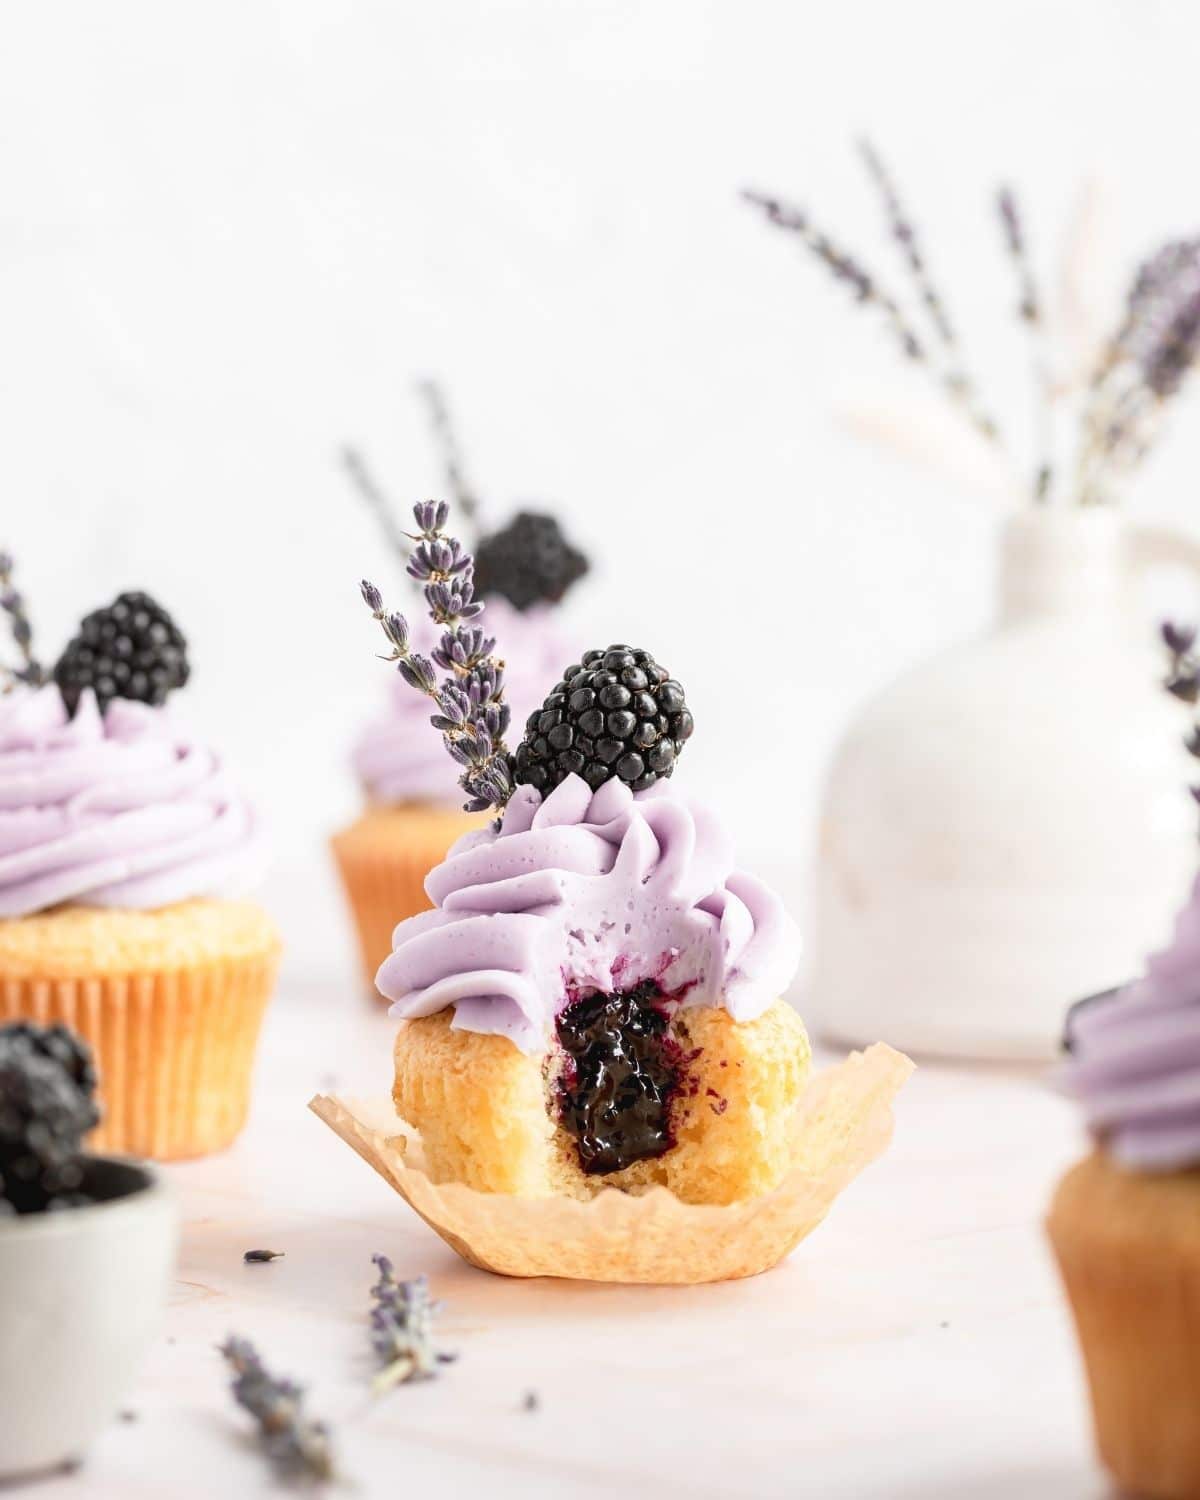 blackberry lavender cupcakes with bite cut out to see the blackberry filling.